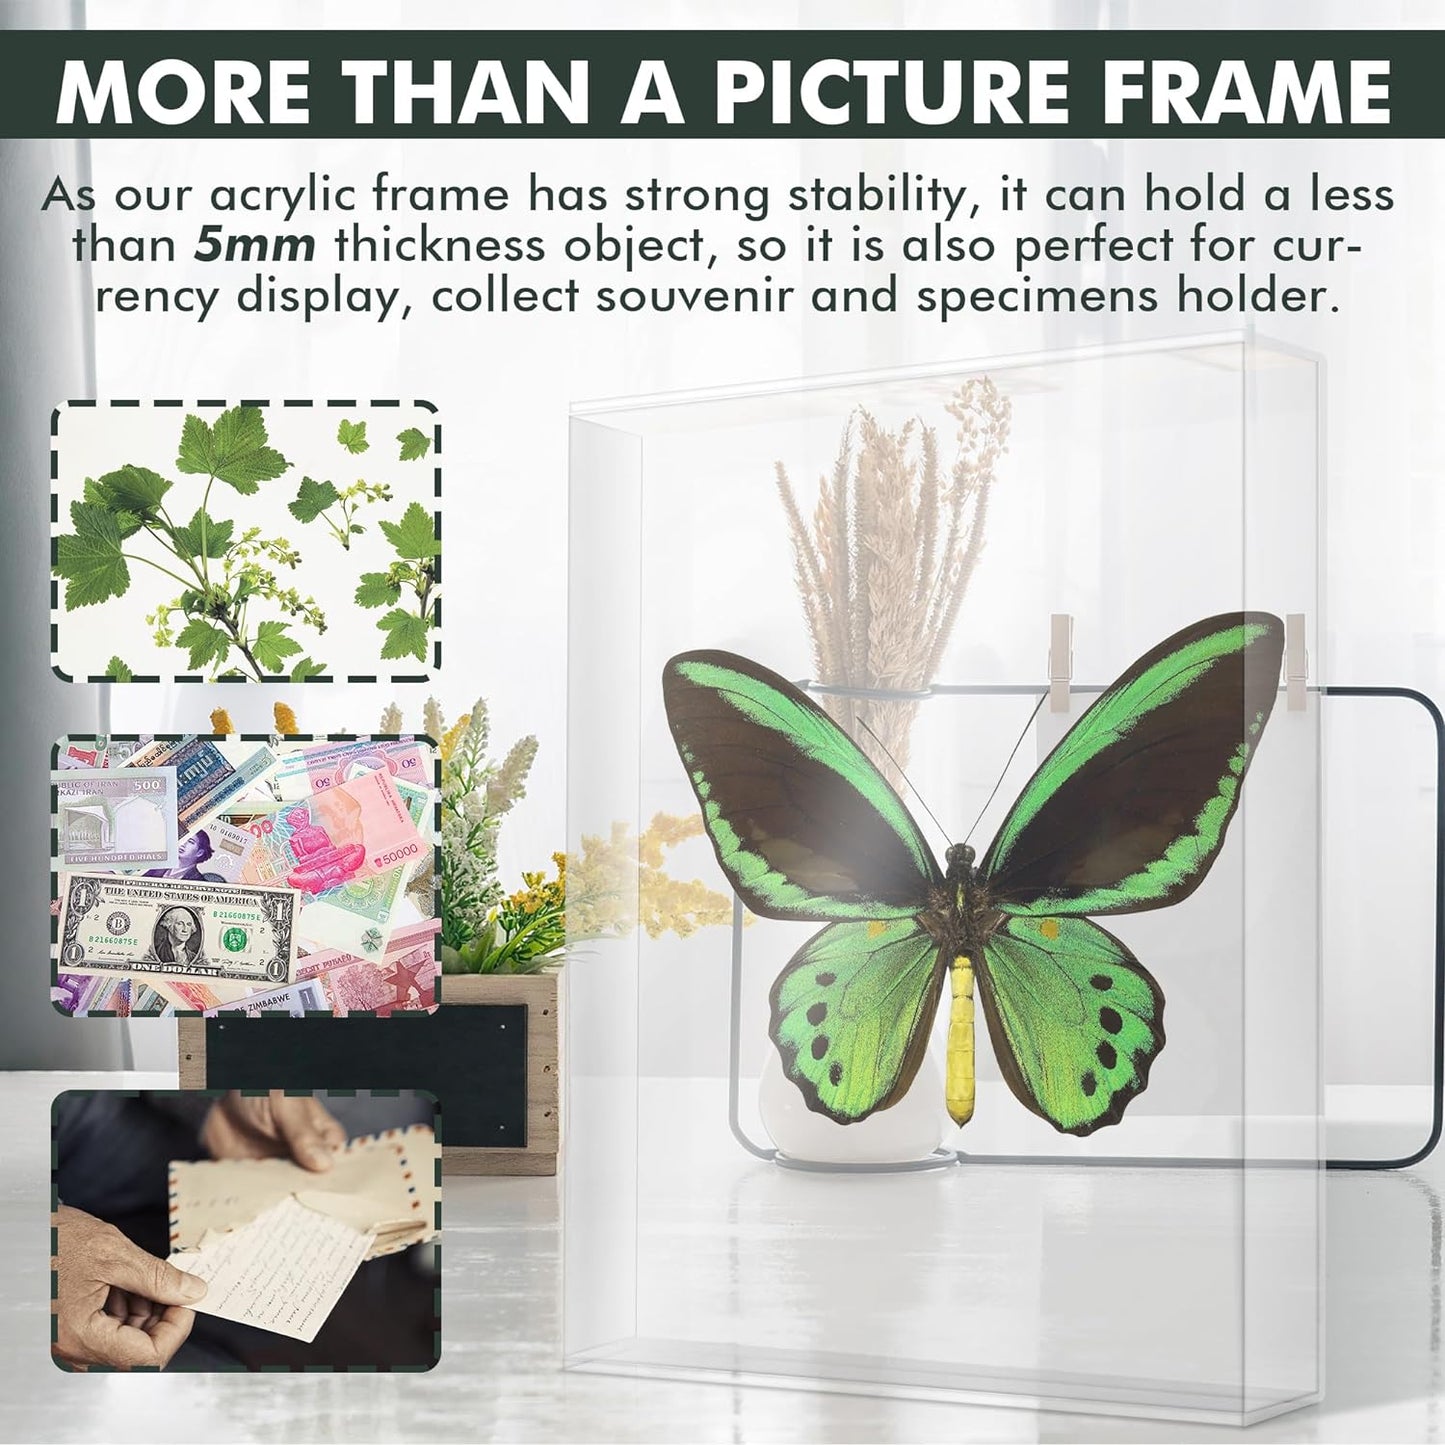 KOALA Acrylic Picture Photo Frame Double-Sided Frameless Desktop Floating Display 4x6 inches 2 Pack